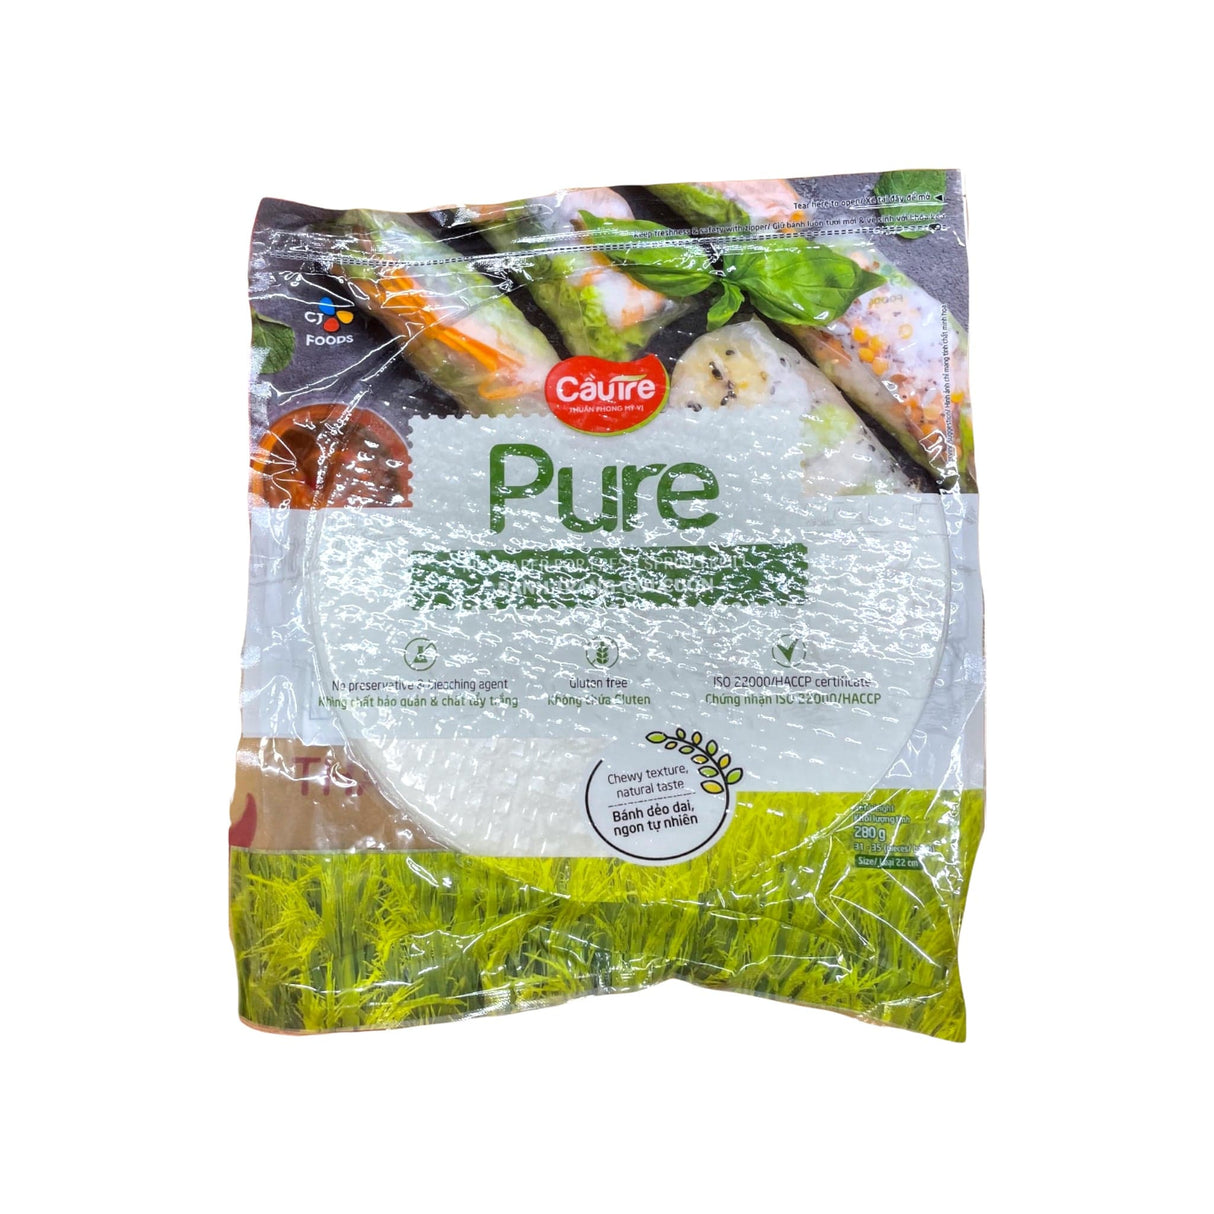 Caoire Pure Rice Paper (For Spring Roll)